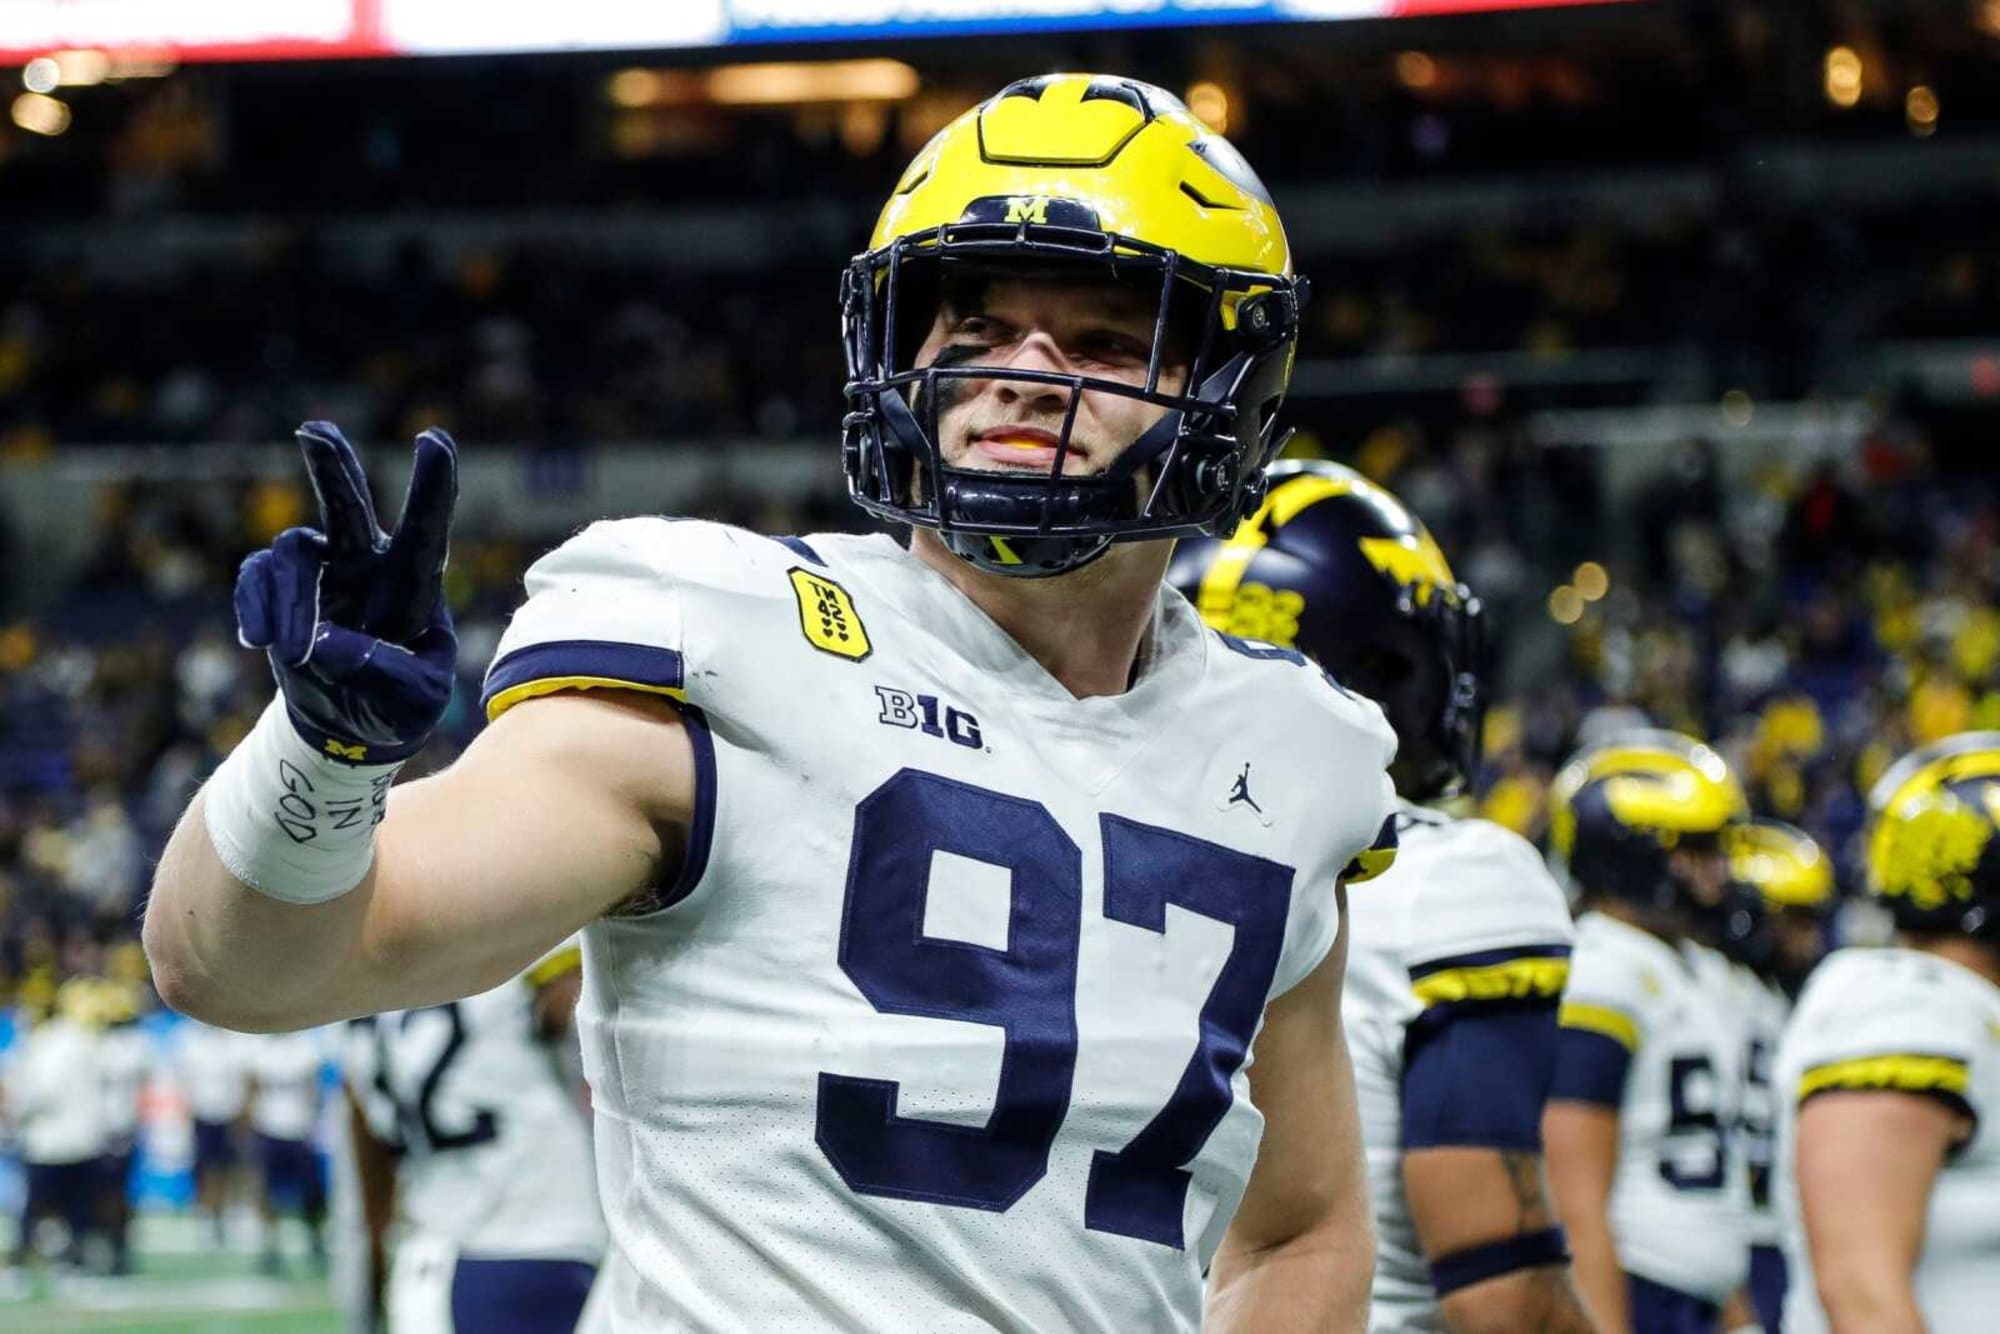 Lions had official visit with Michigan defensive end Aidan Hutchinson Monday